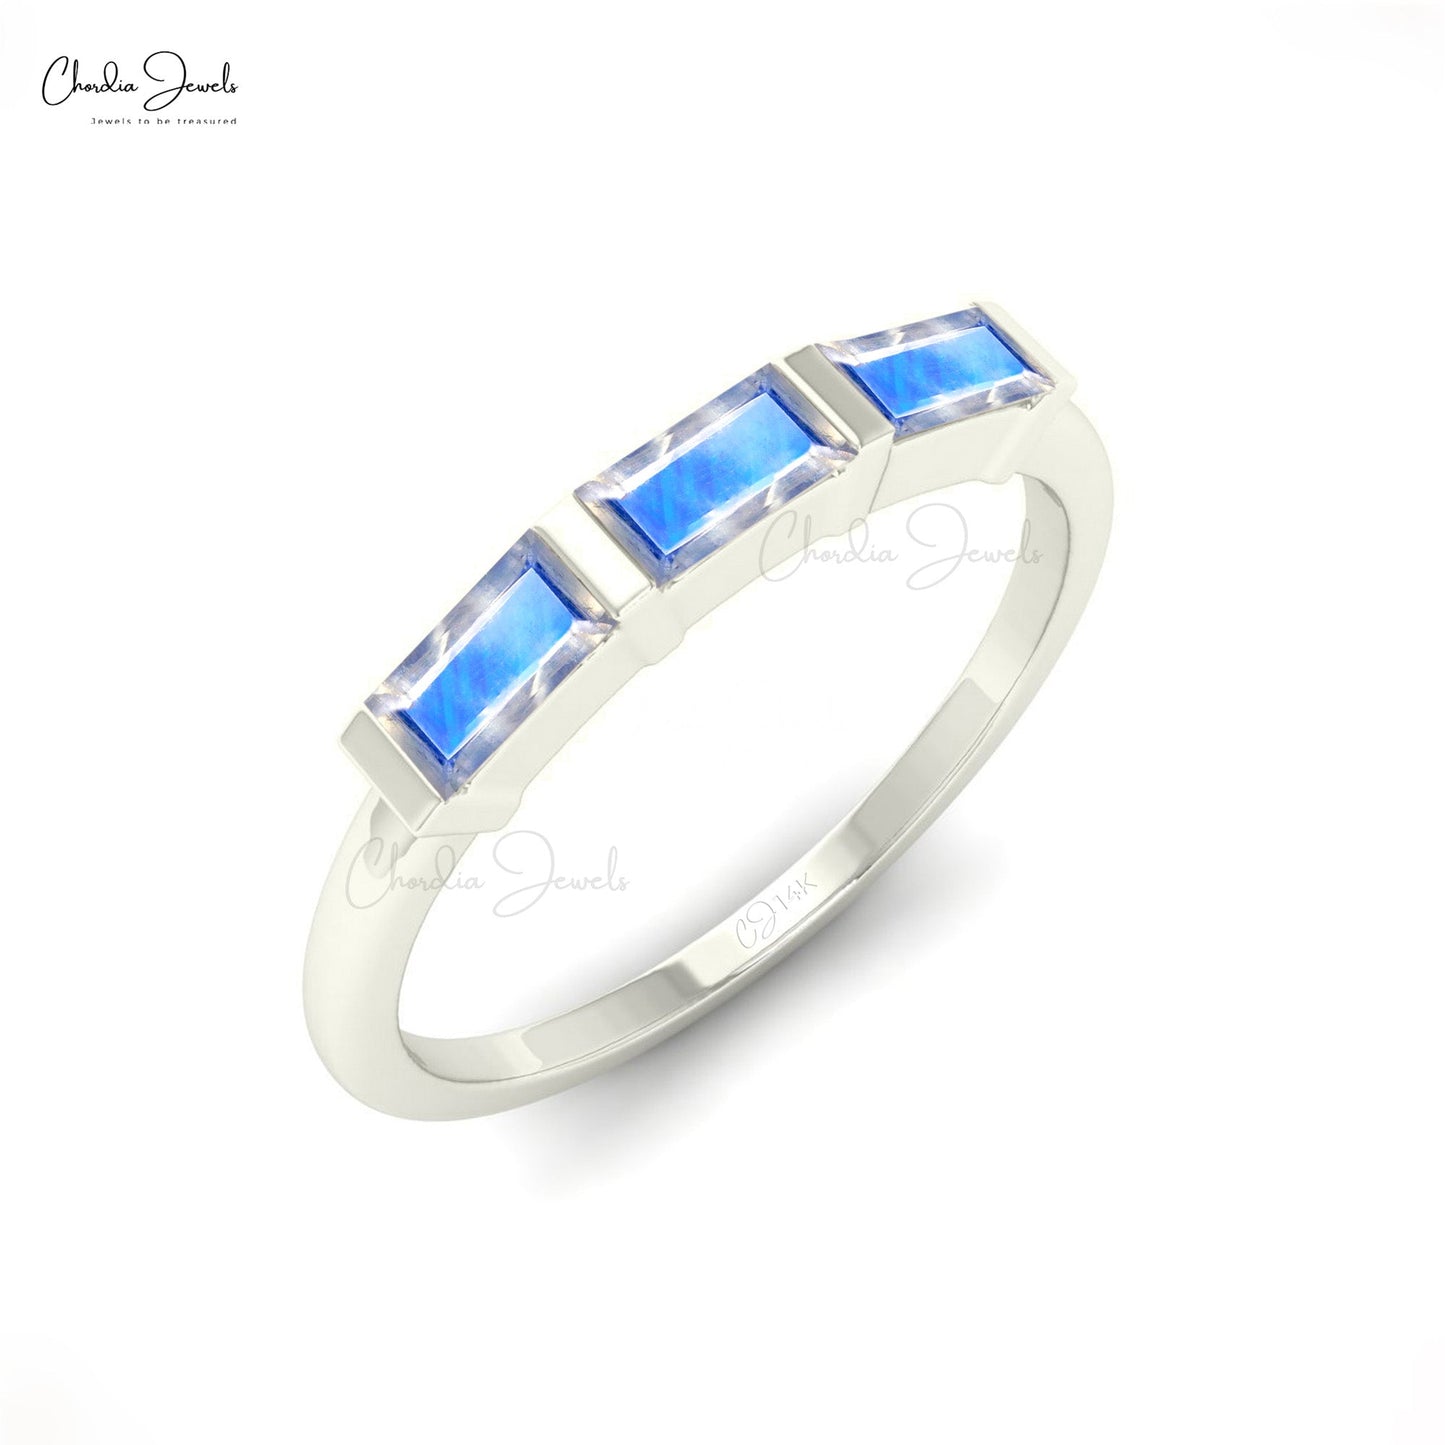 Load image into Gallery viewer, Rainbow Moonstone Baguette Cut Three Stone Ring In 14K Gold For Woman
